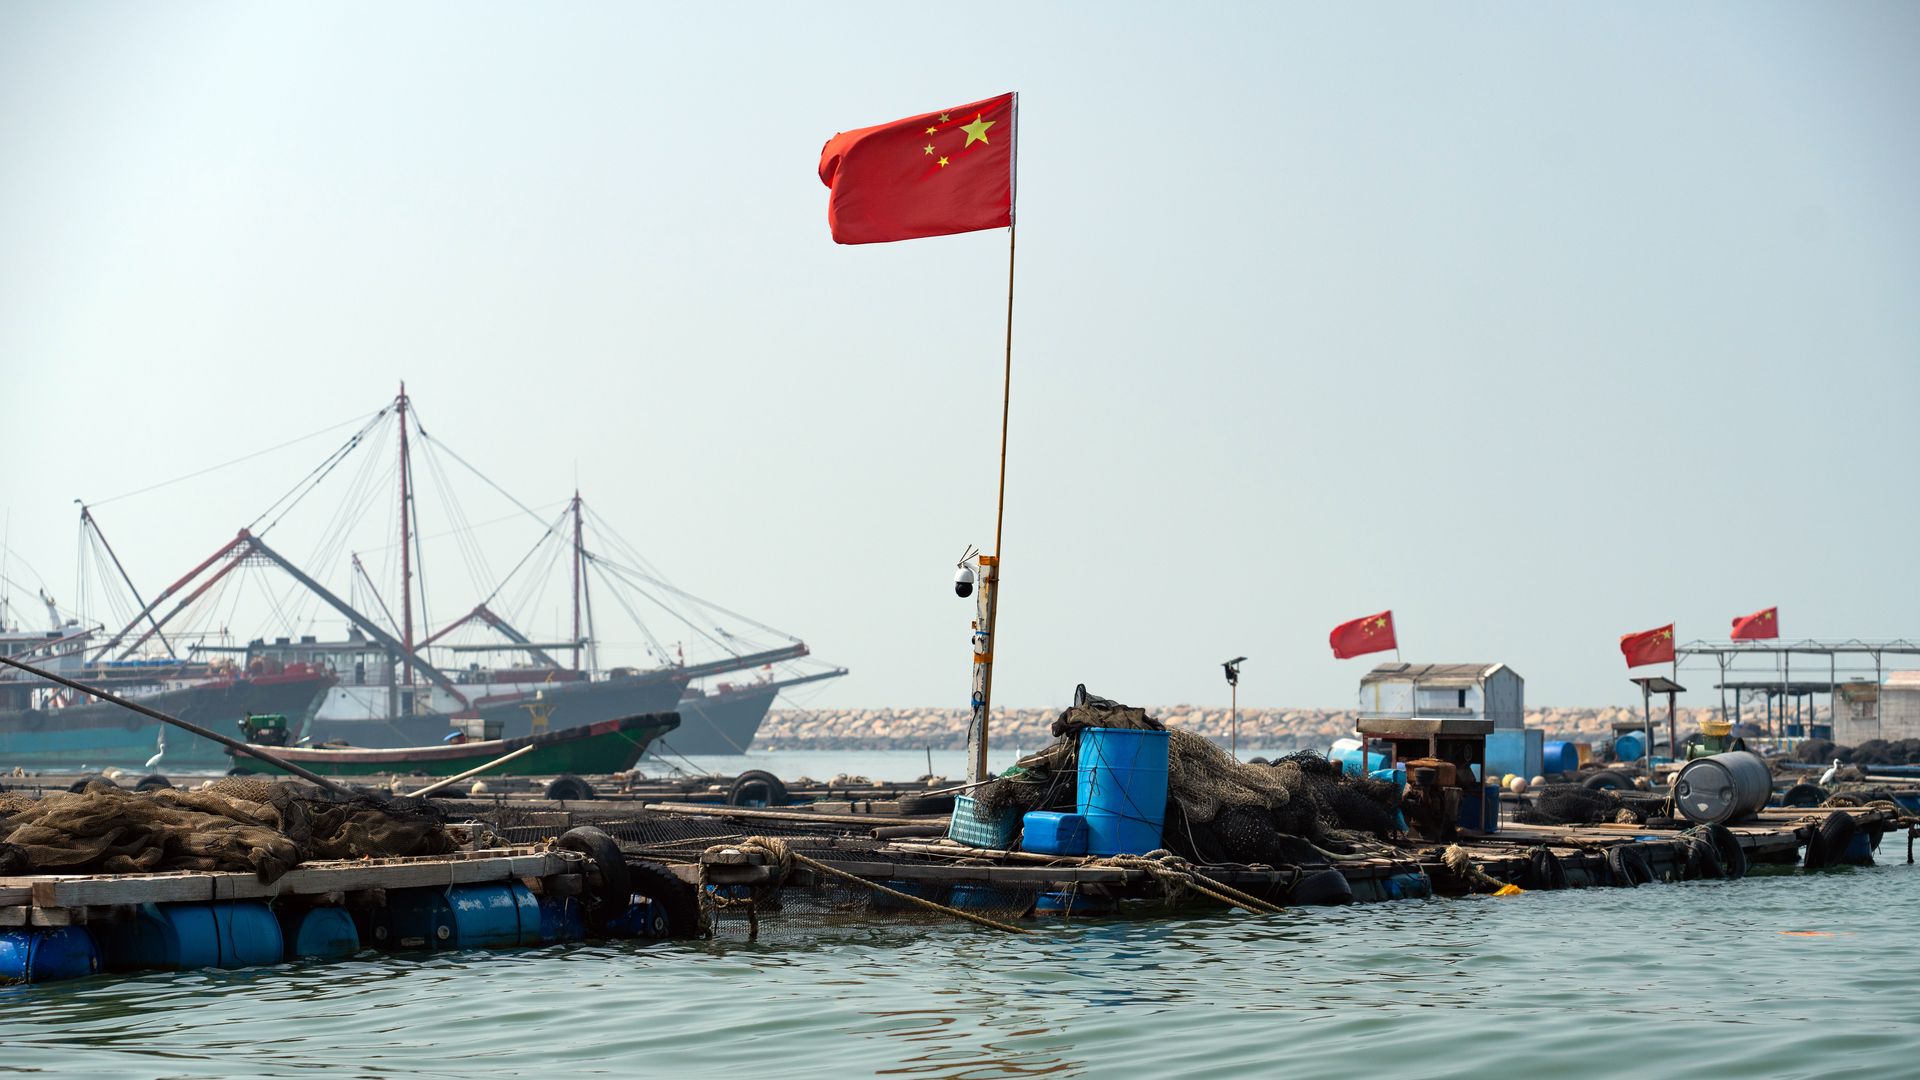 A Chinese flag waving with fishing vessels in the background in the South China Sea